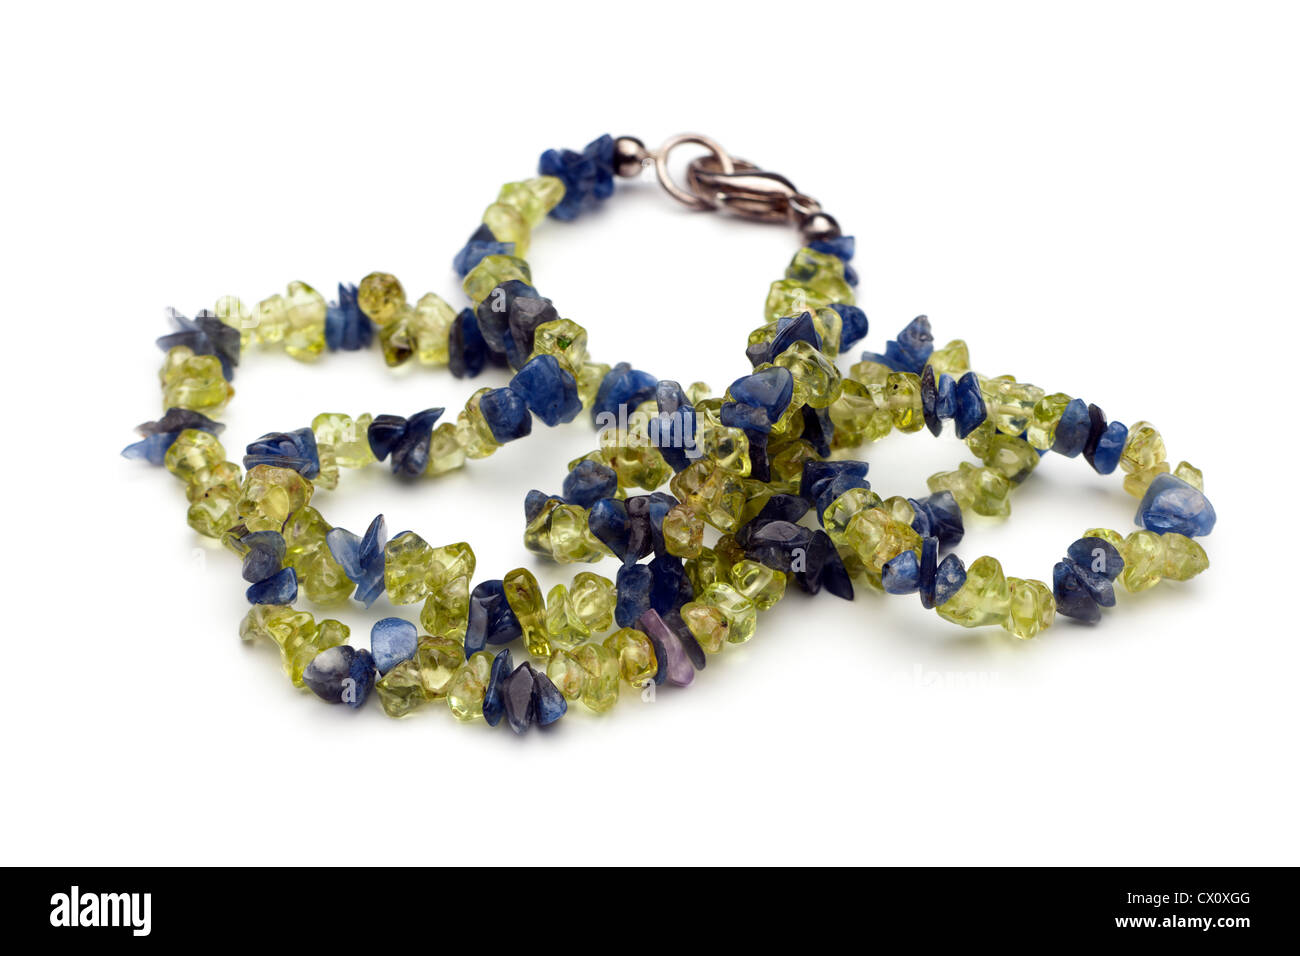 Green and blue plastic threaded bead necklace Stock Photo